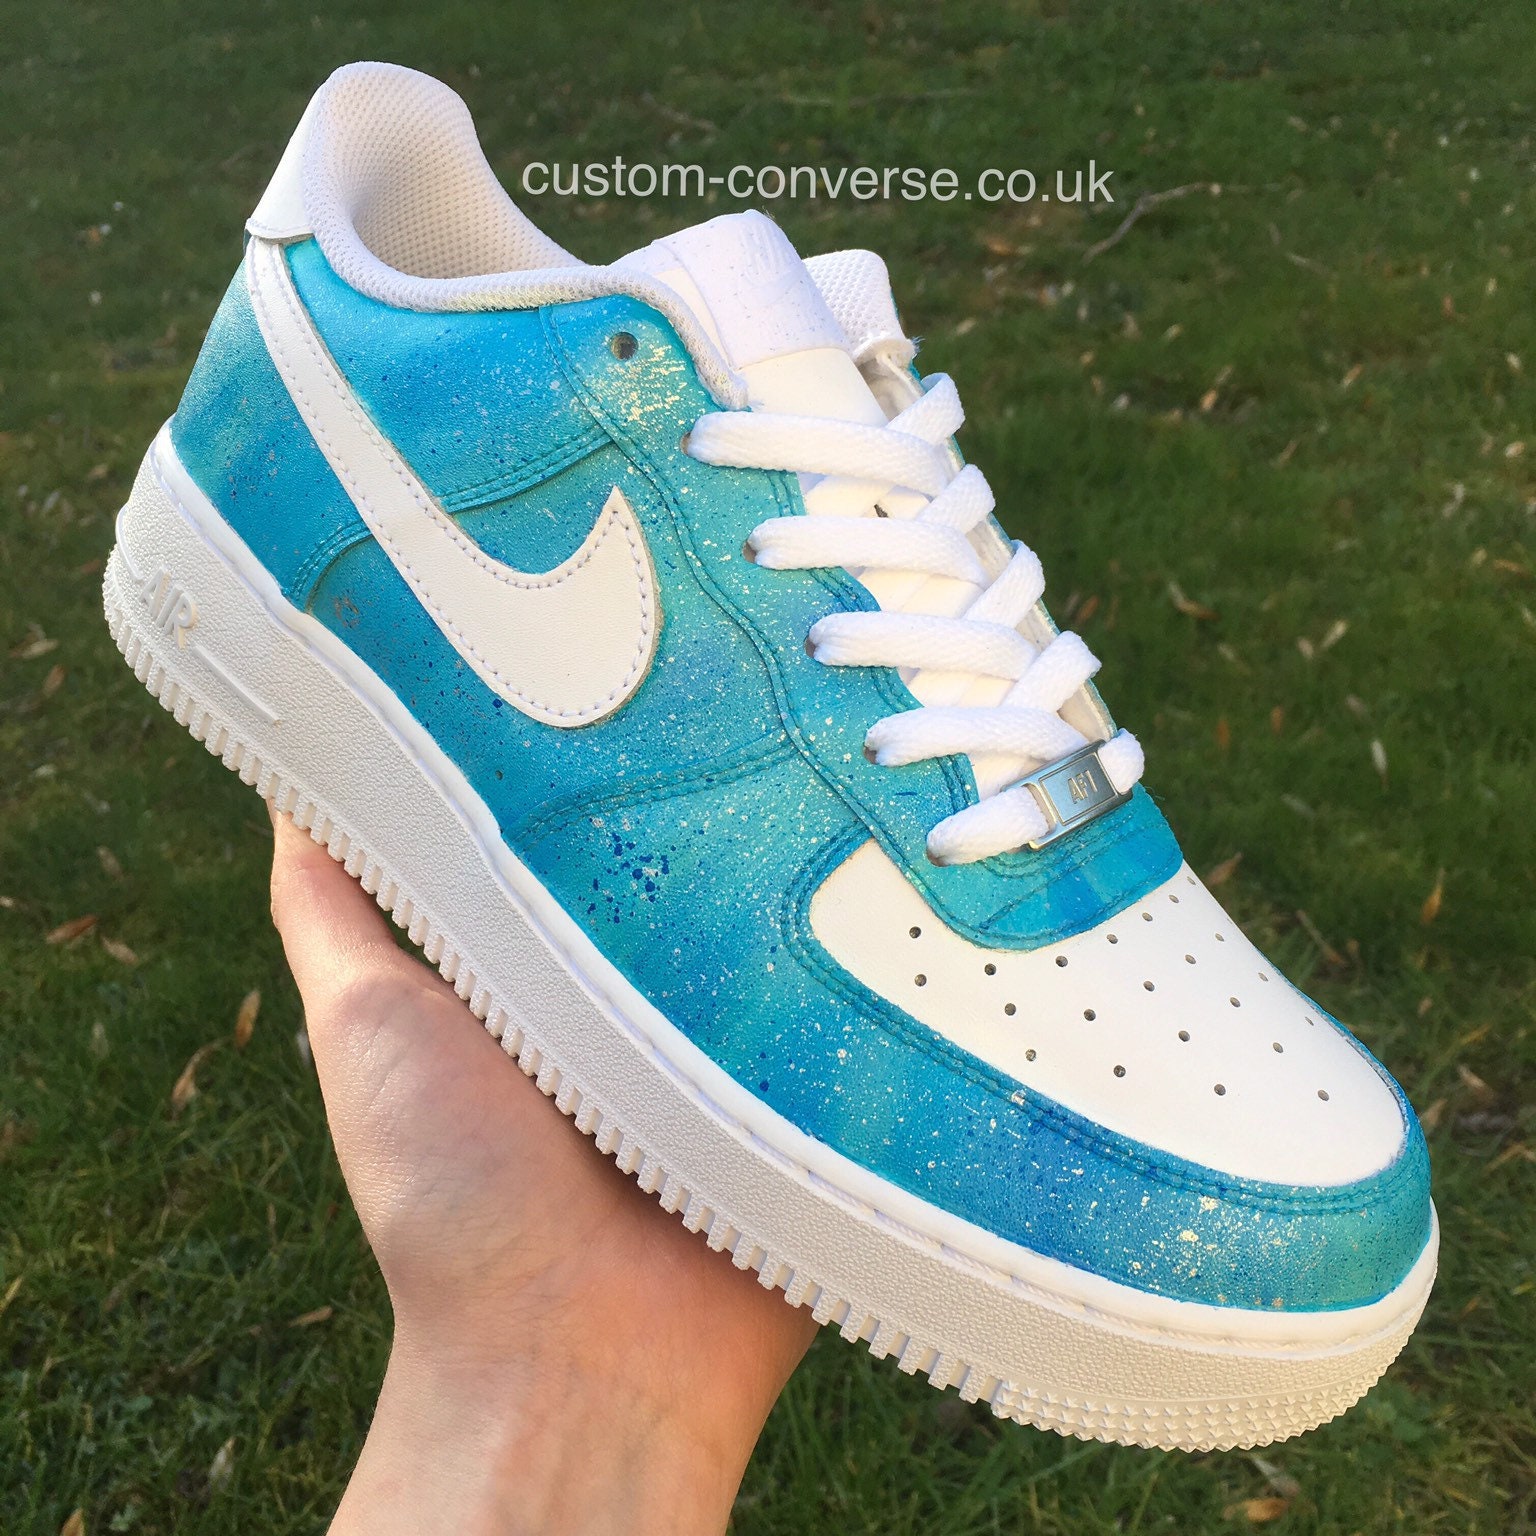 Ocean Dream Hand Painted Nike Air Force 1 Trainers - Etsy